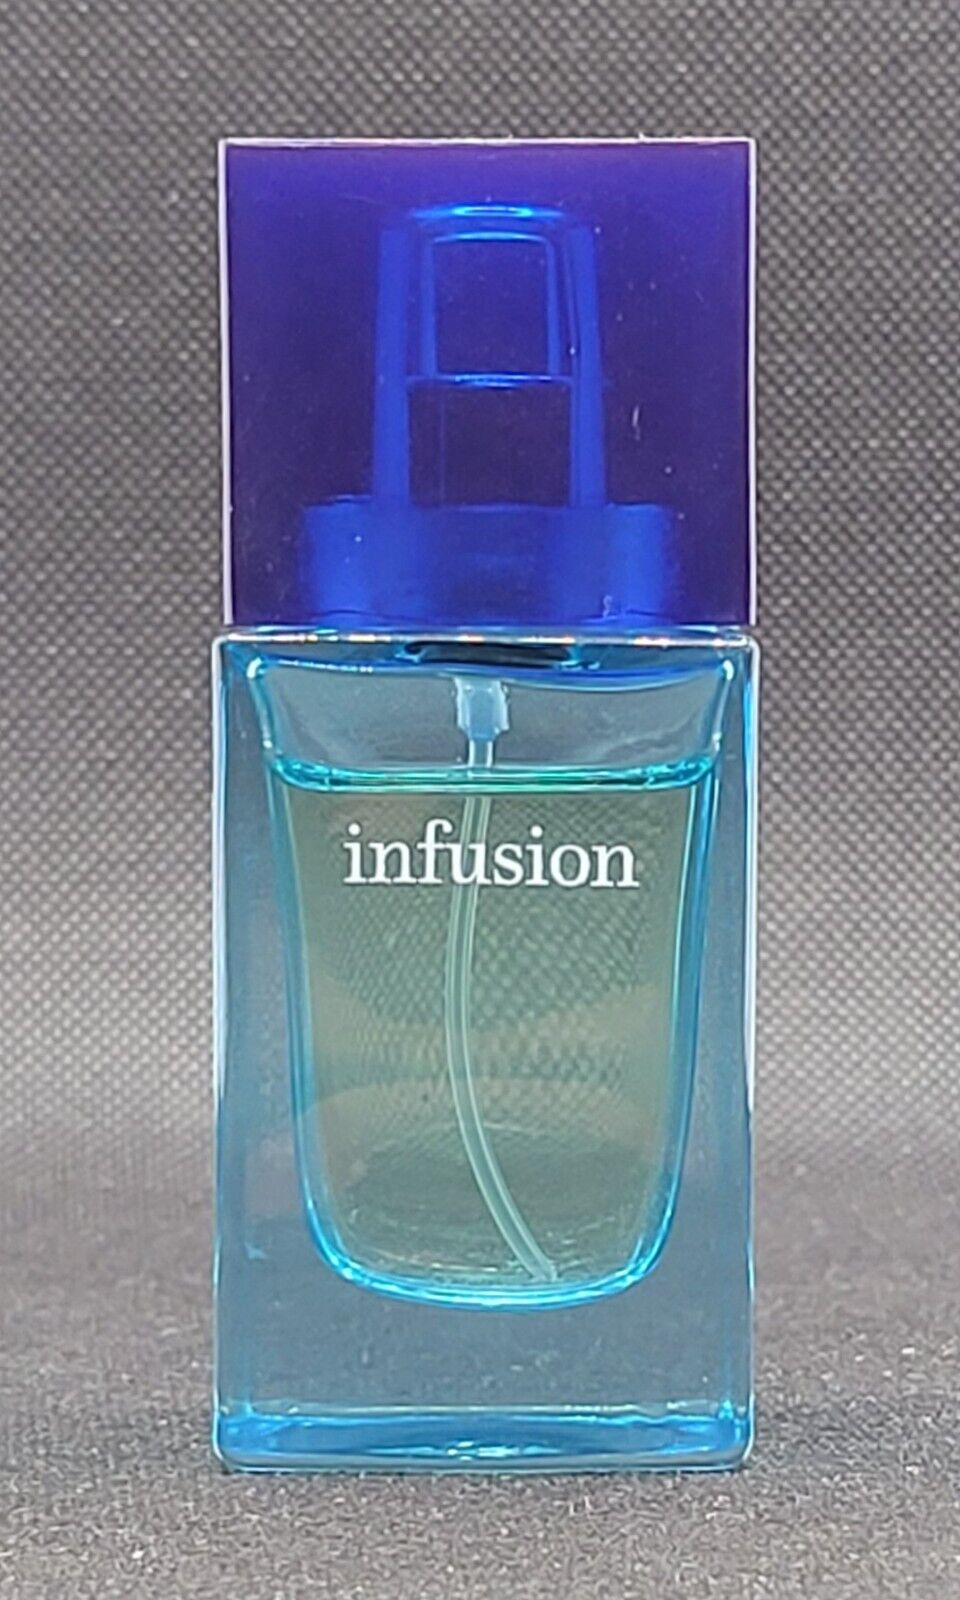 Bombay Sapphire Infusion - EdT - 30 ml Bottle - Extremely Rare Limited Edition 